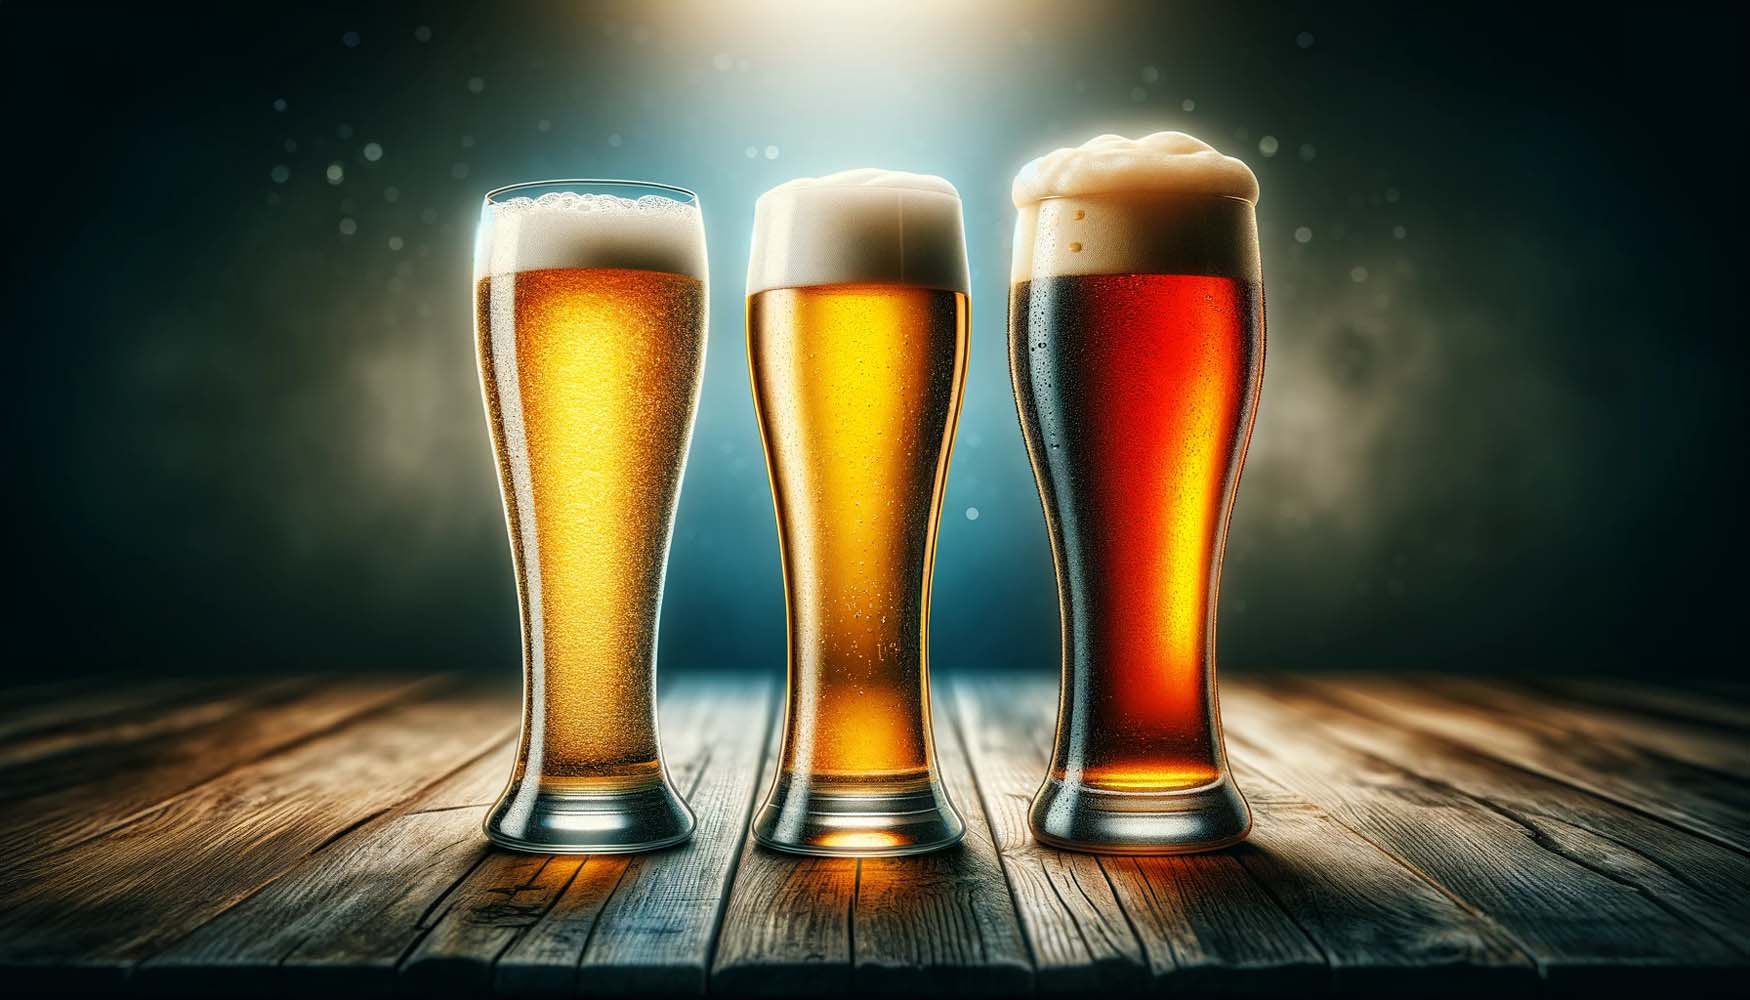 Pilsner vs. Lager: The Differences and Similarities